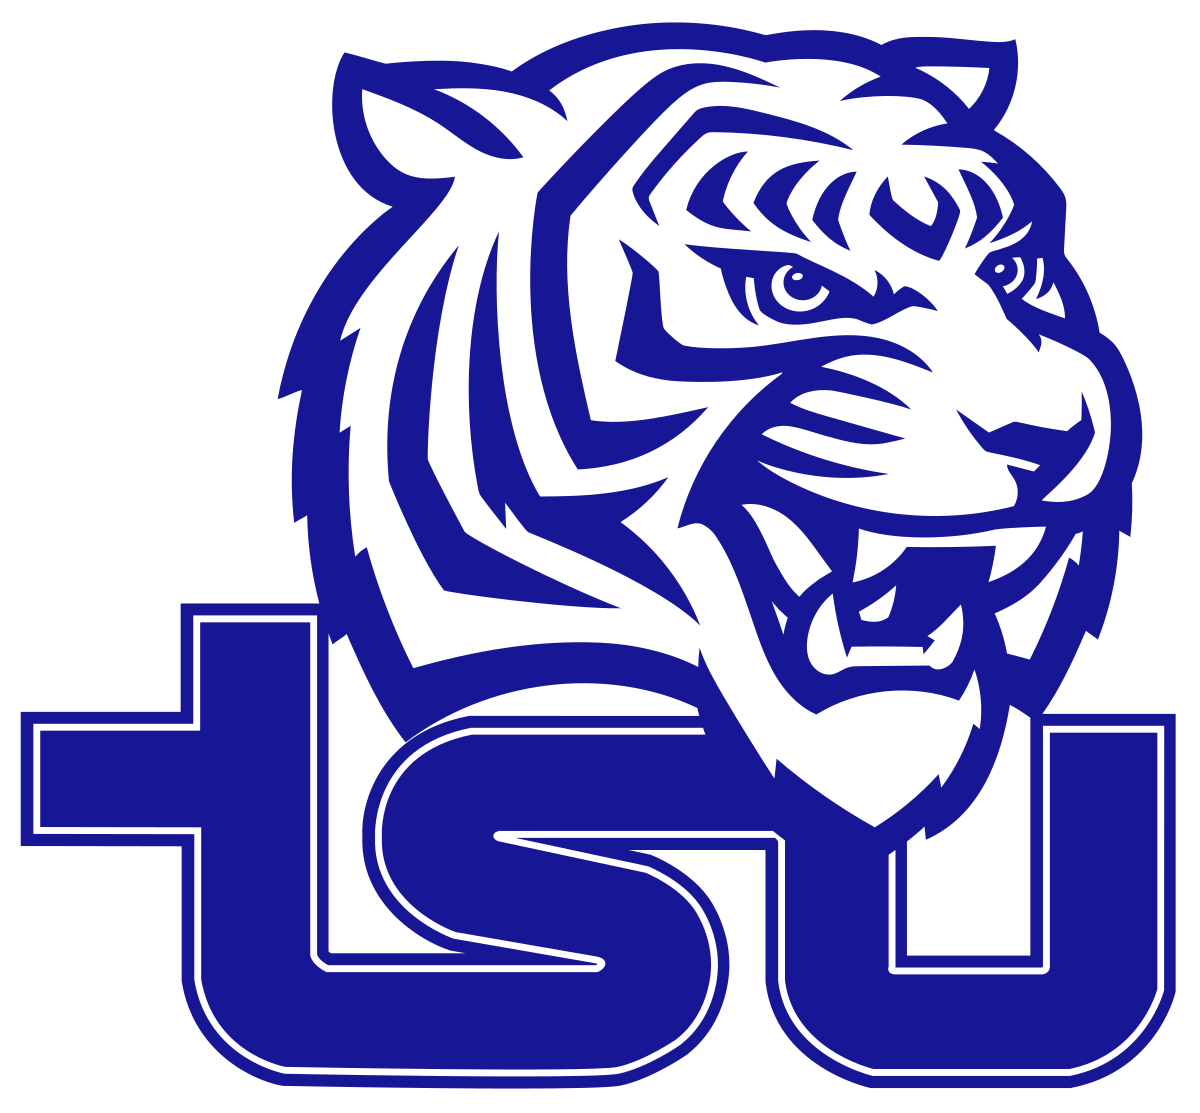 Tennessee State Tigers and Lady Tigers - Wikipedia